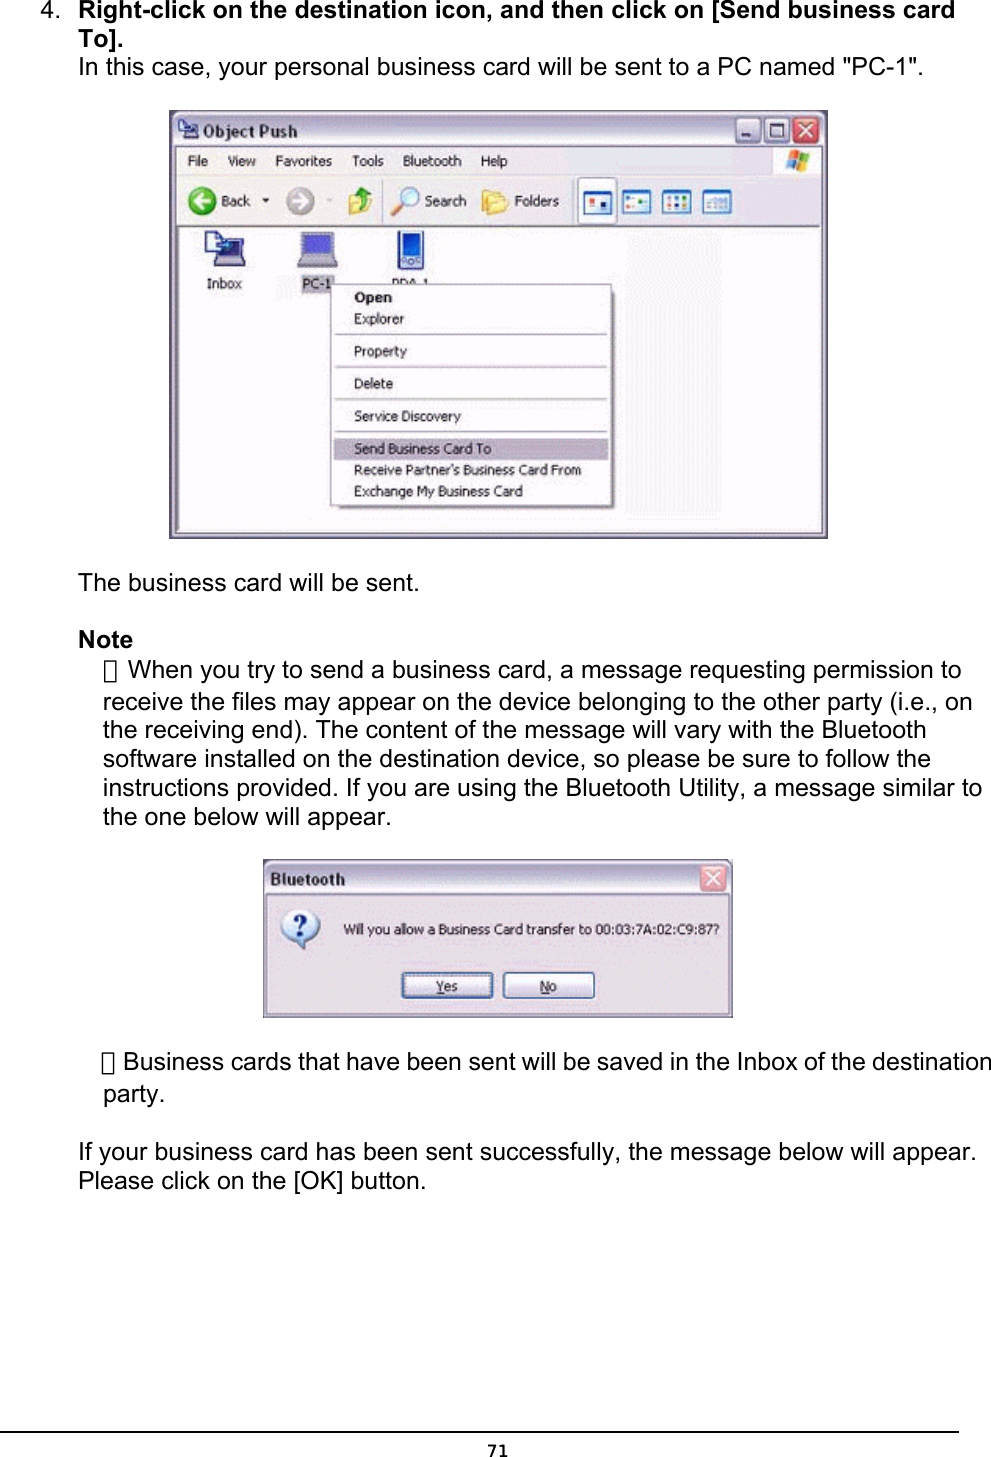  4.  Right-click on the destination icon, and then click on [Send business card To]. In this case, your personal business card will be sent to a PC named &quot;PC-1&quot;.  The business card will be sent.   Note ．When you try to send a business card, a message requesting permission to receive the files may appear on the device belonging to the other party (i.e., on the receiving end). The content of the message will vary with the Bluetooth software installed on the destination device, so please be sure to follow the instructions provided. If you are using the Bluetooth Utility, a message similar to the one below will appear.  ．Business cards that have been sent will be saved in the Inbox of the destination party.  If your business card has been sent successfully, the message below will appear. Please click on the [OK] button.  71